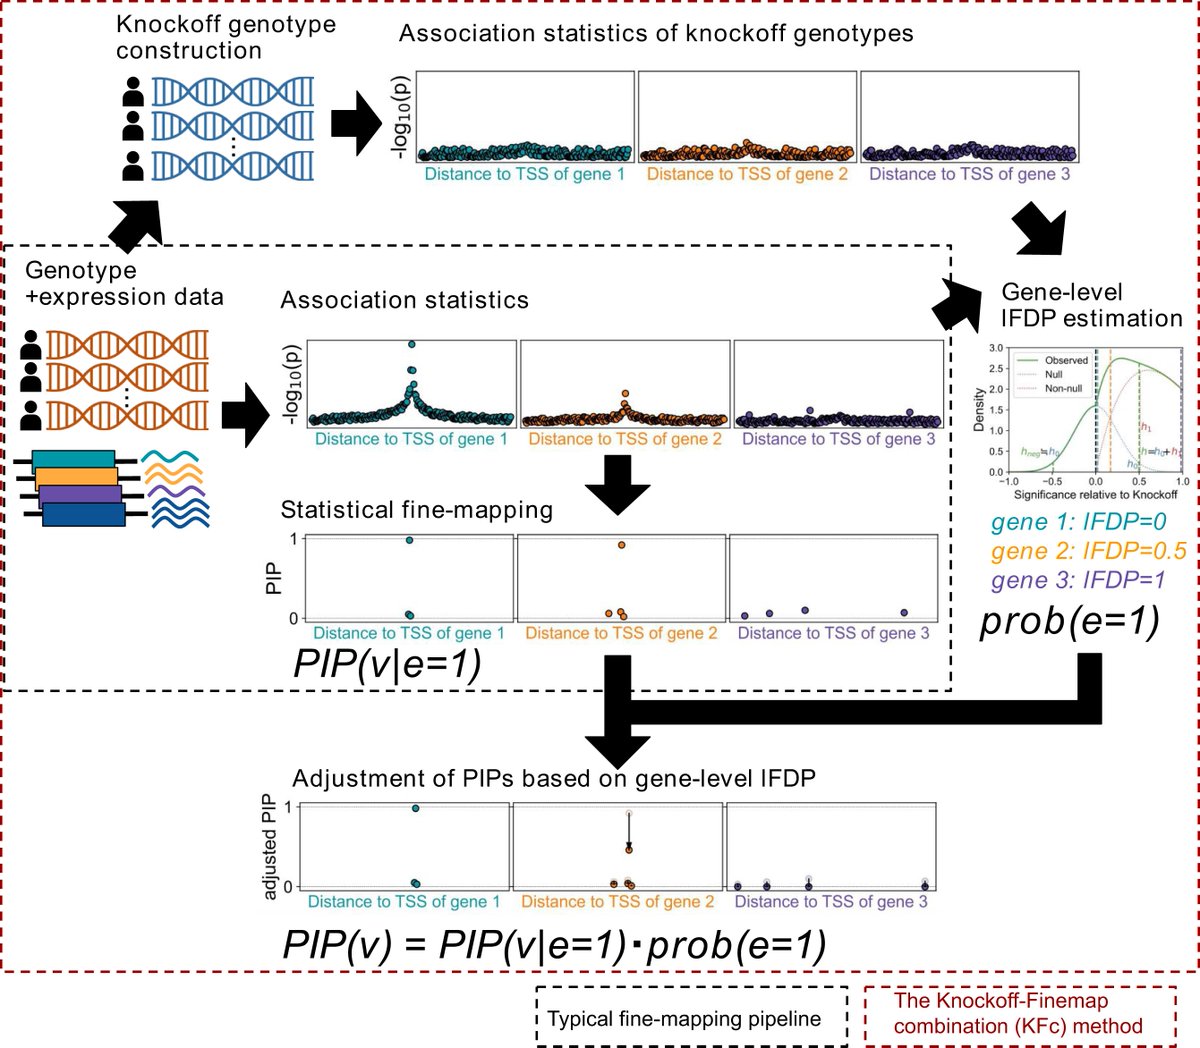 New application of knockoff genotypes (synthetic genotypes resembling original ones) for omics resources by @qbw_128. Knockoff–Finemap combination (KFc), a refined fine-mapping algorithm of eQTL to adjust PIPs. Now at NAR Genom Bioinform🎉㊗️ academic.oup.com/nargab/article…